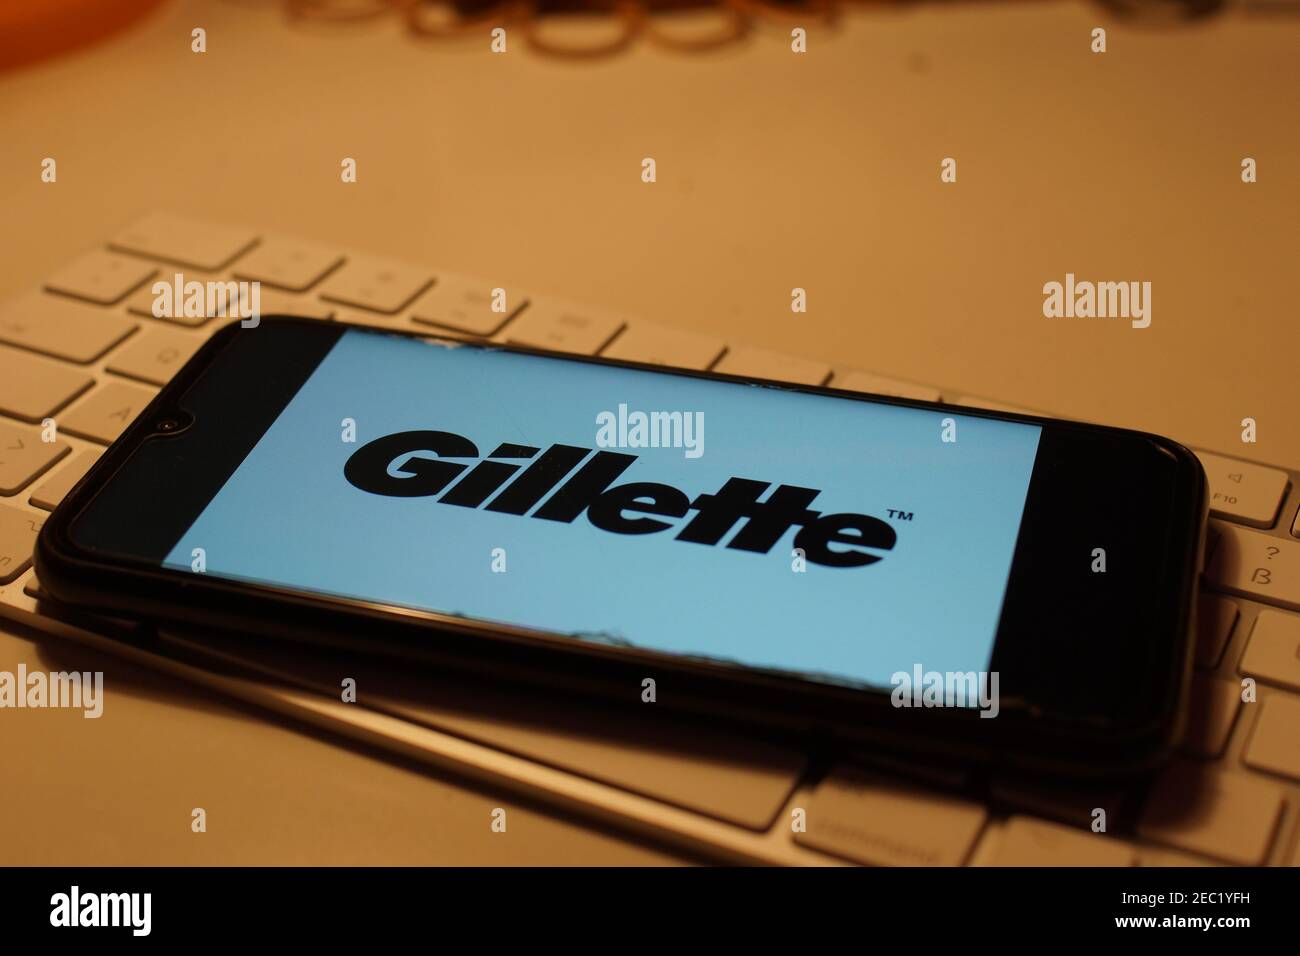 Smartphone with Gillette logo on computer keyboard Stock Photo